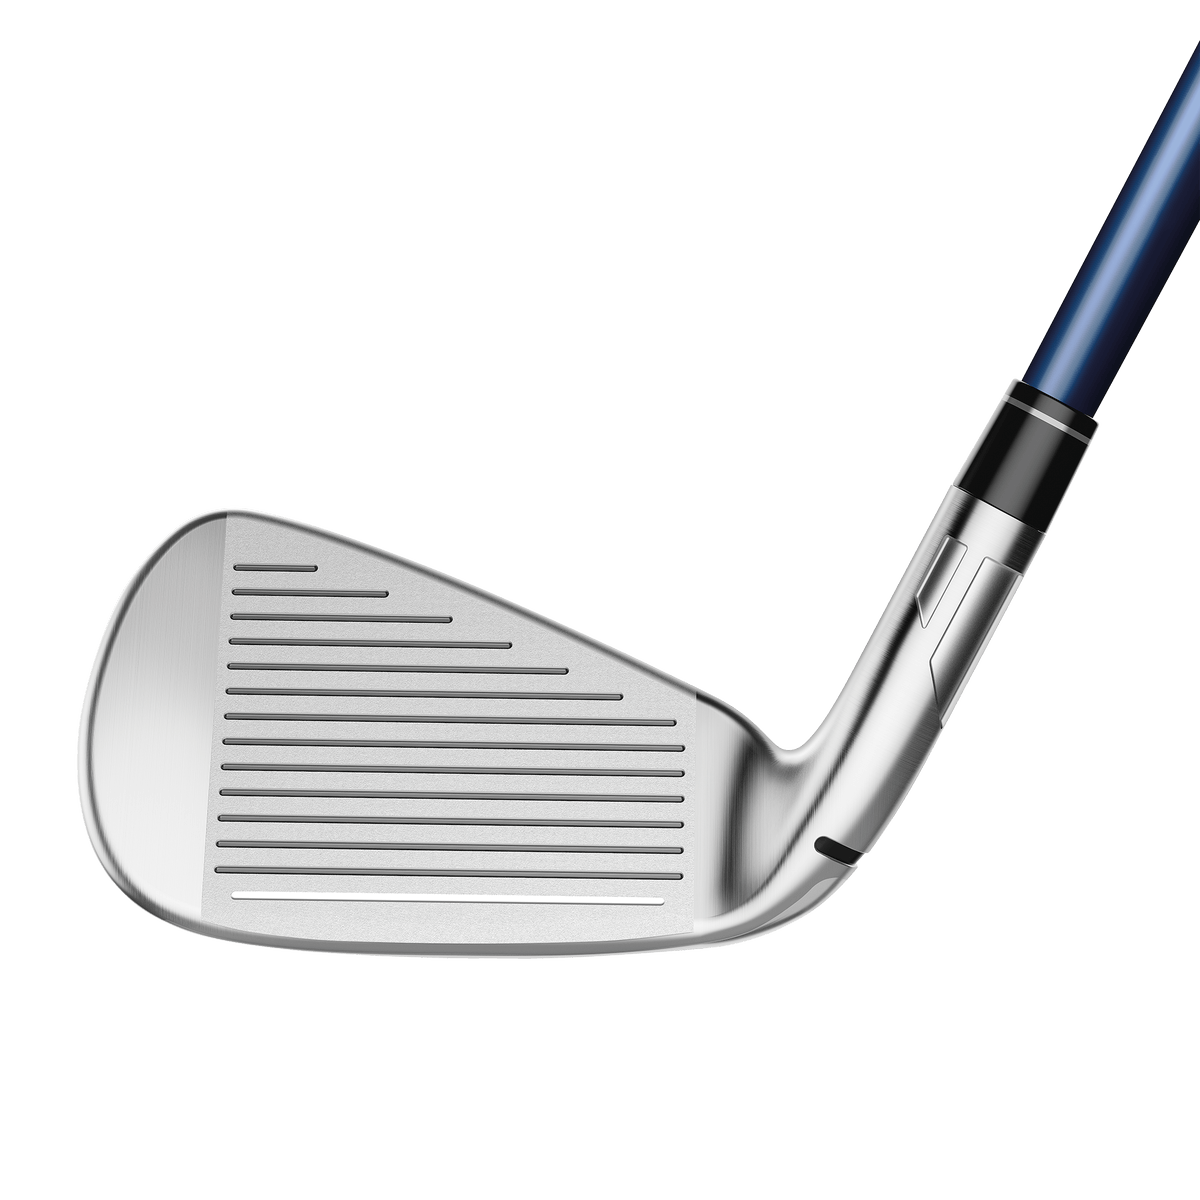 TaylorMade SIM2 Max OS Irons · Right handed · Steel · Regular · 5-PW